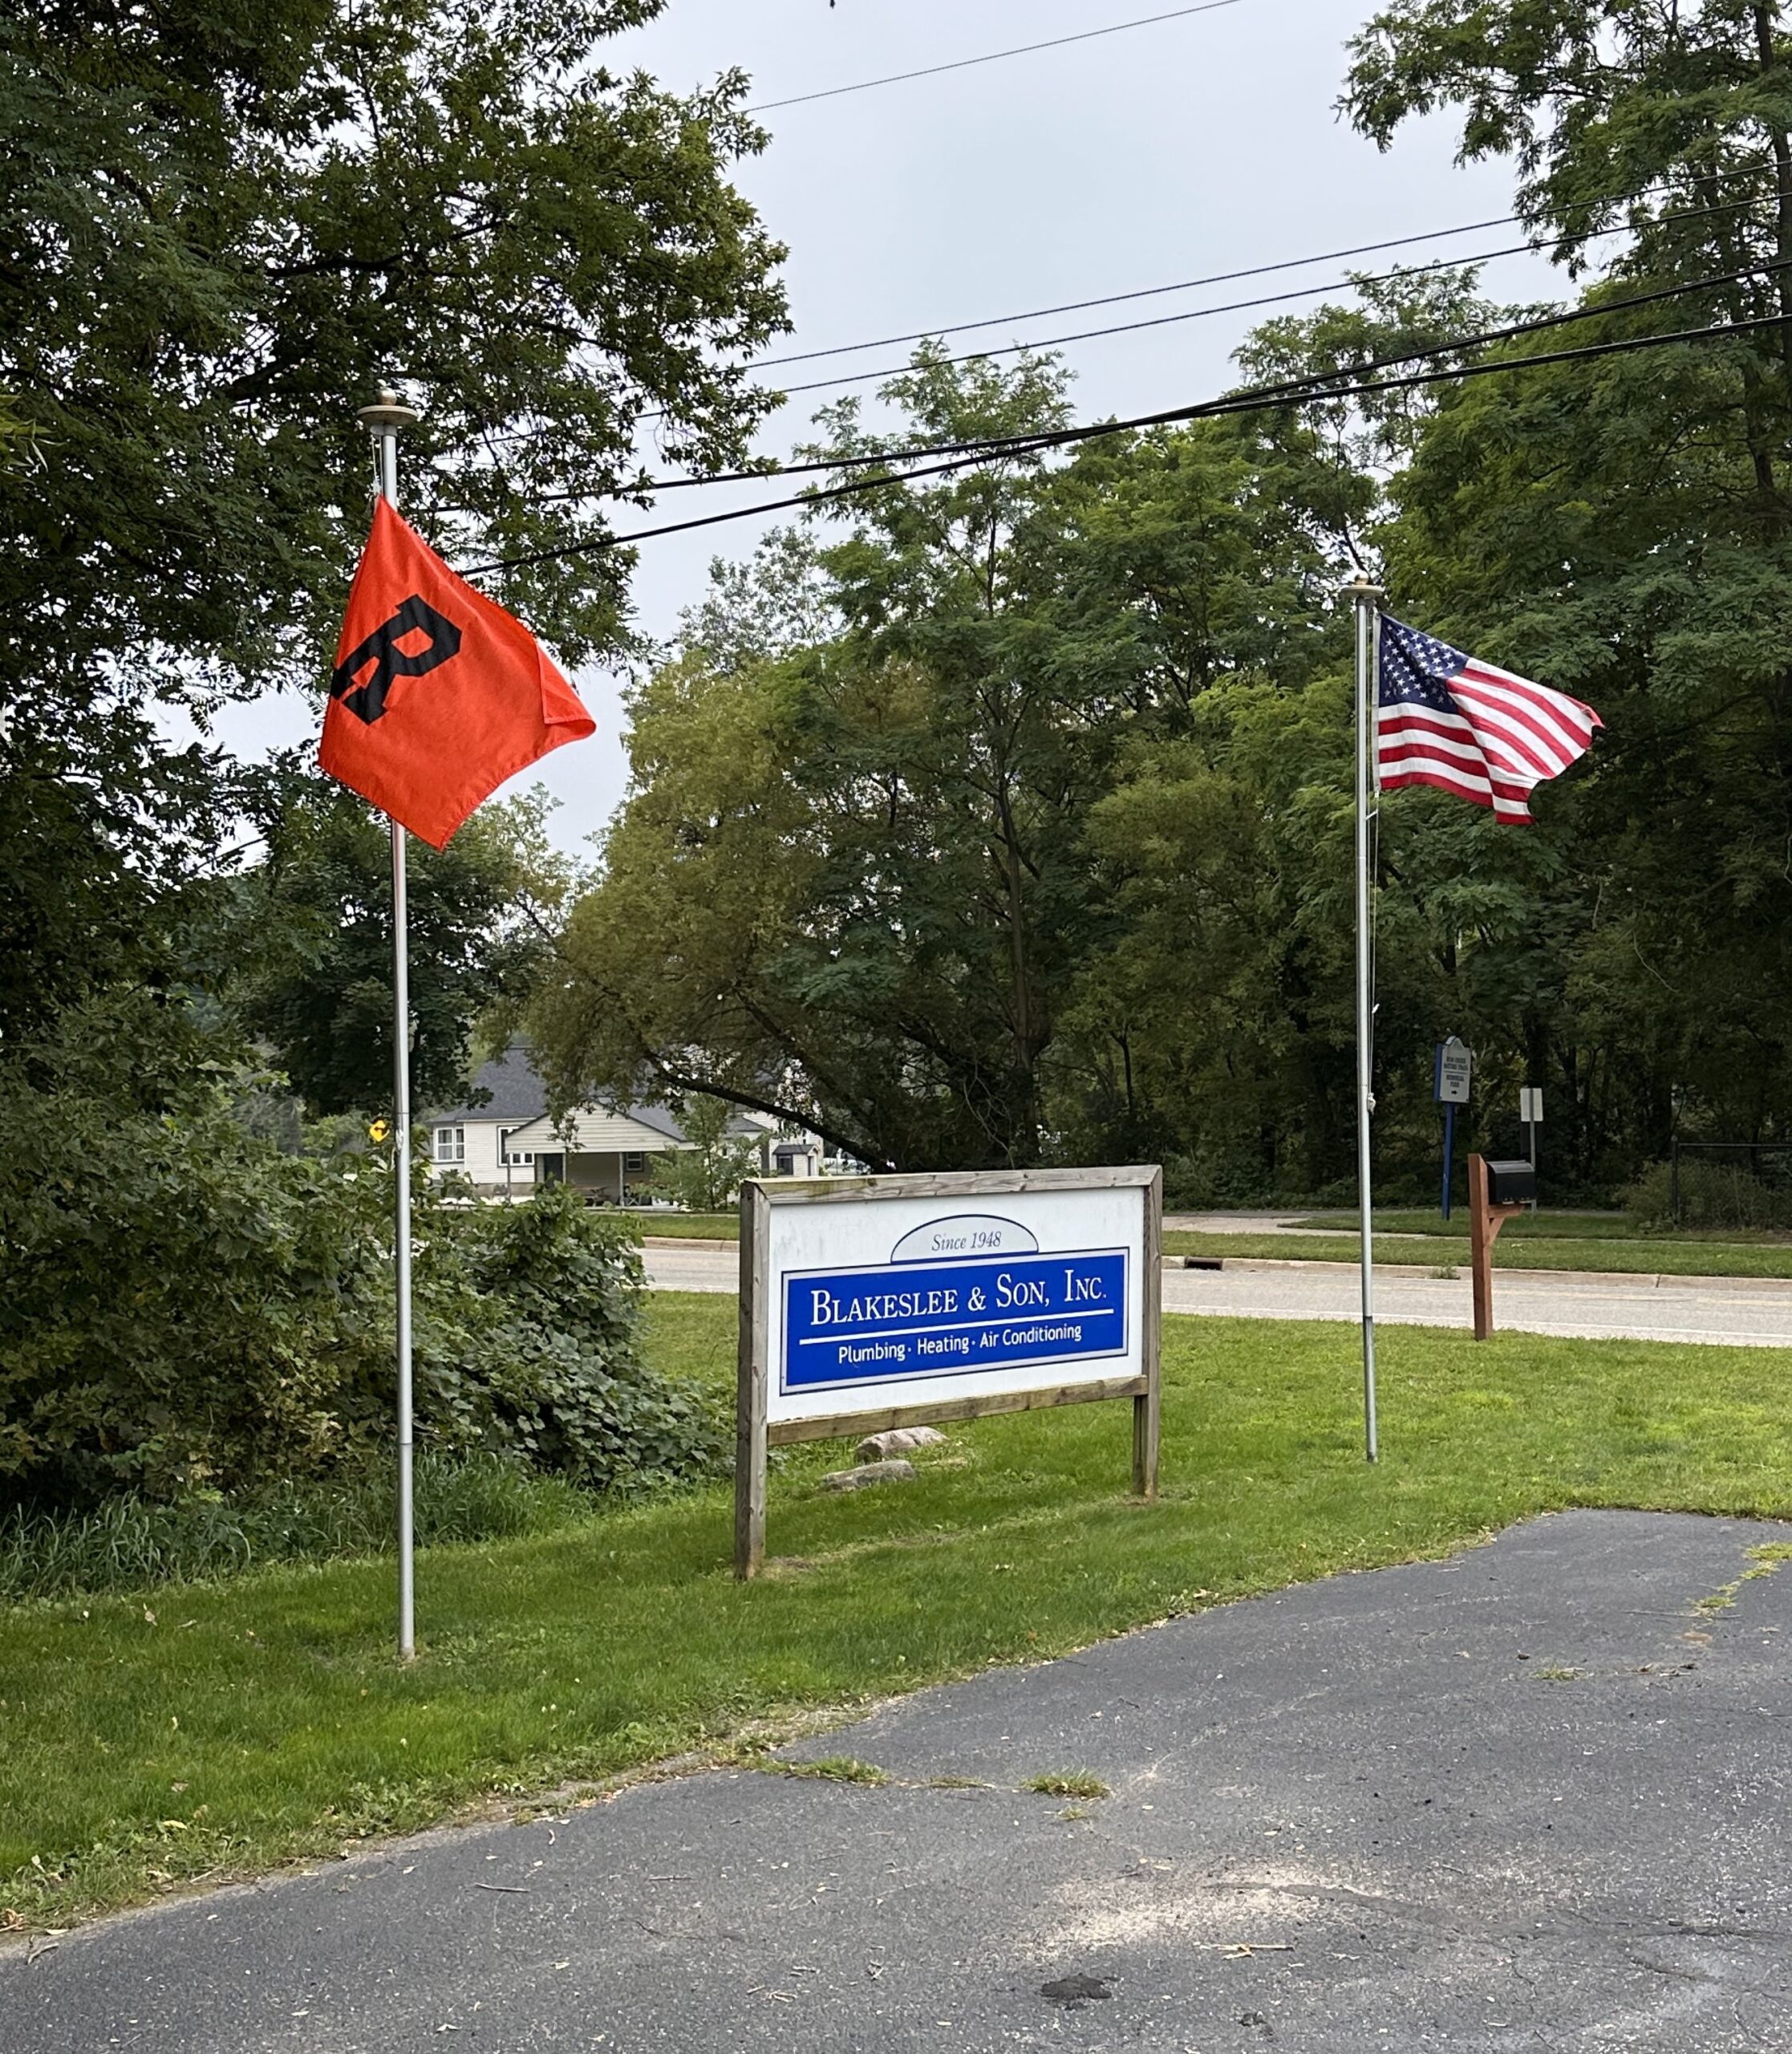 The Blakeslee sign outdoors alongside the American flag and the Blakeslee flag